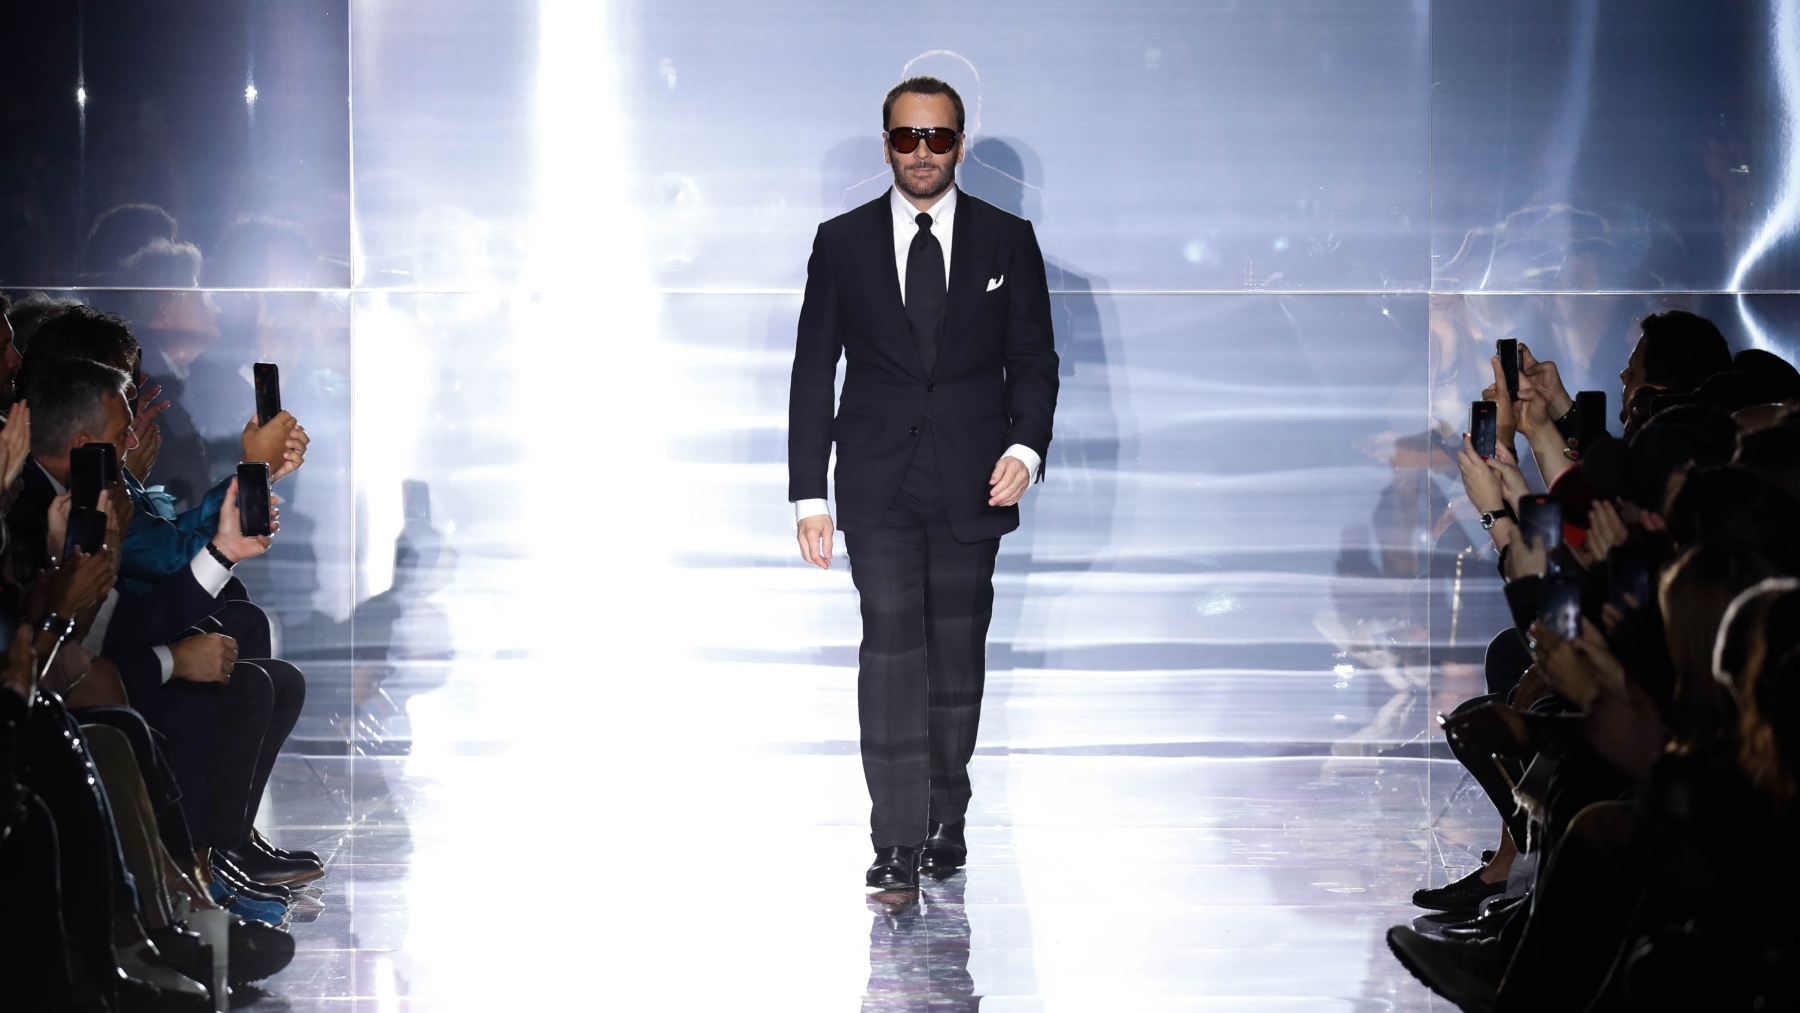 The Tom Ford Documentary